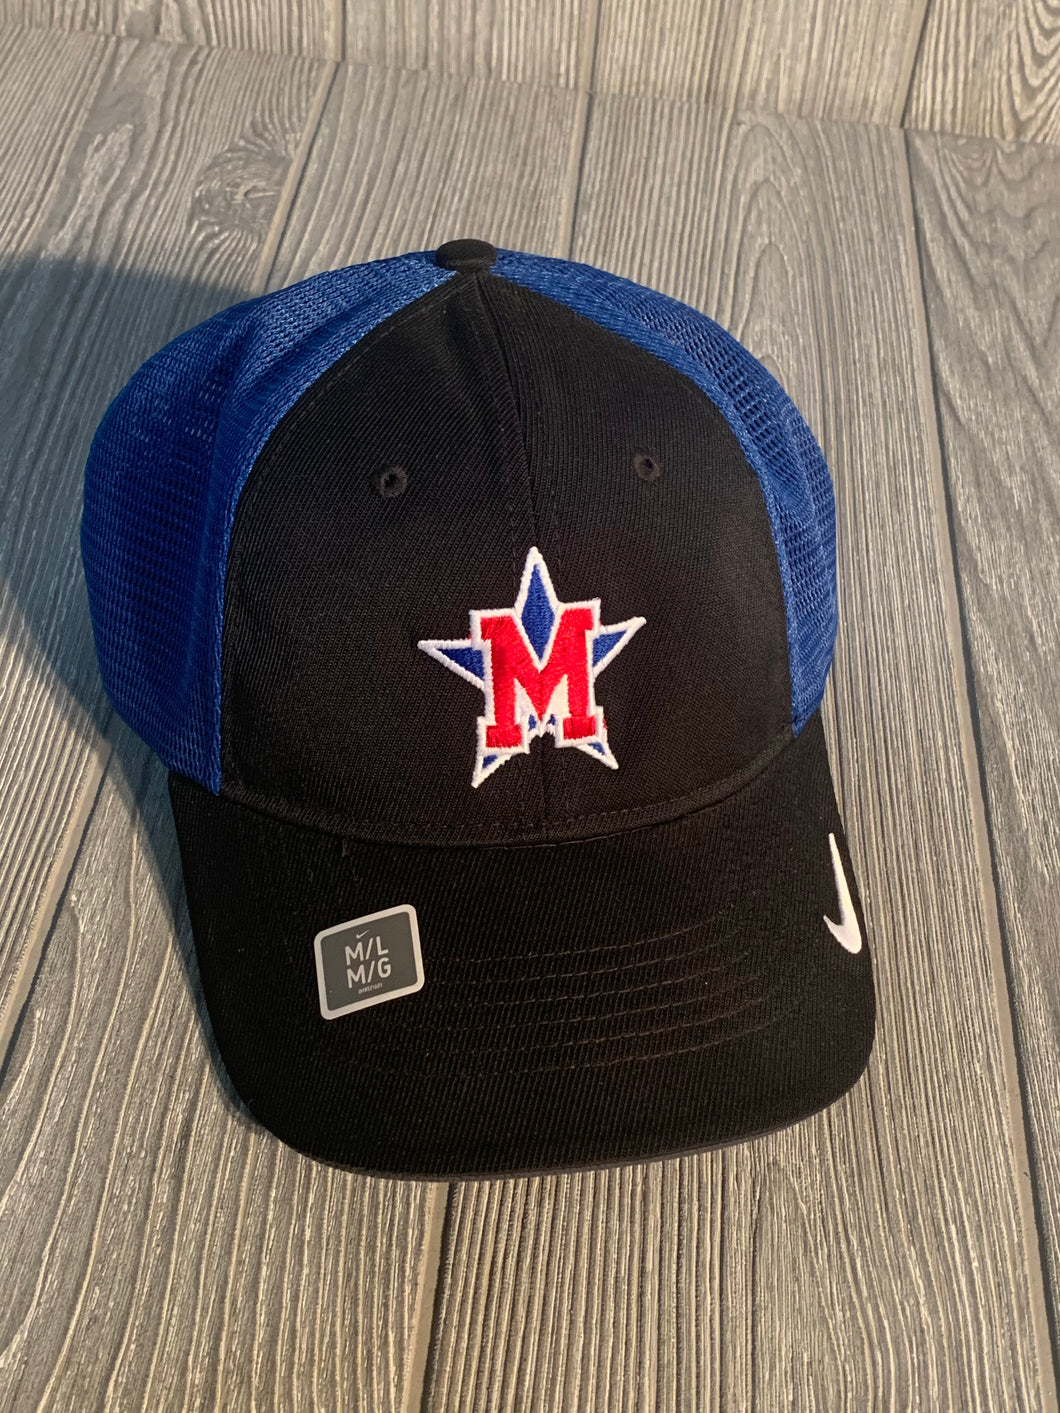 Mcdowell Titan Embroidered Nike Fitted Hat